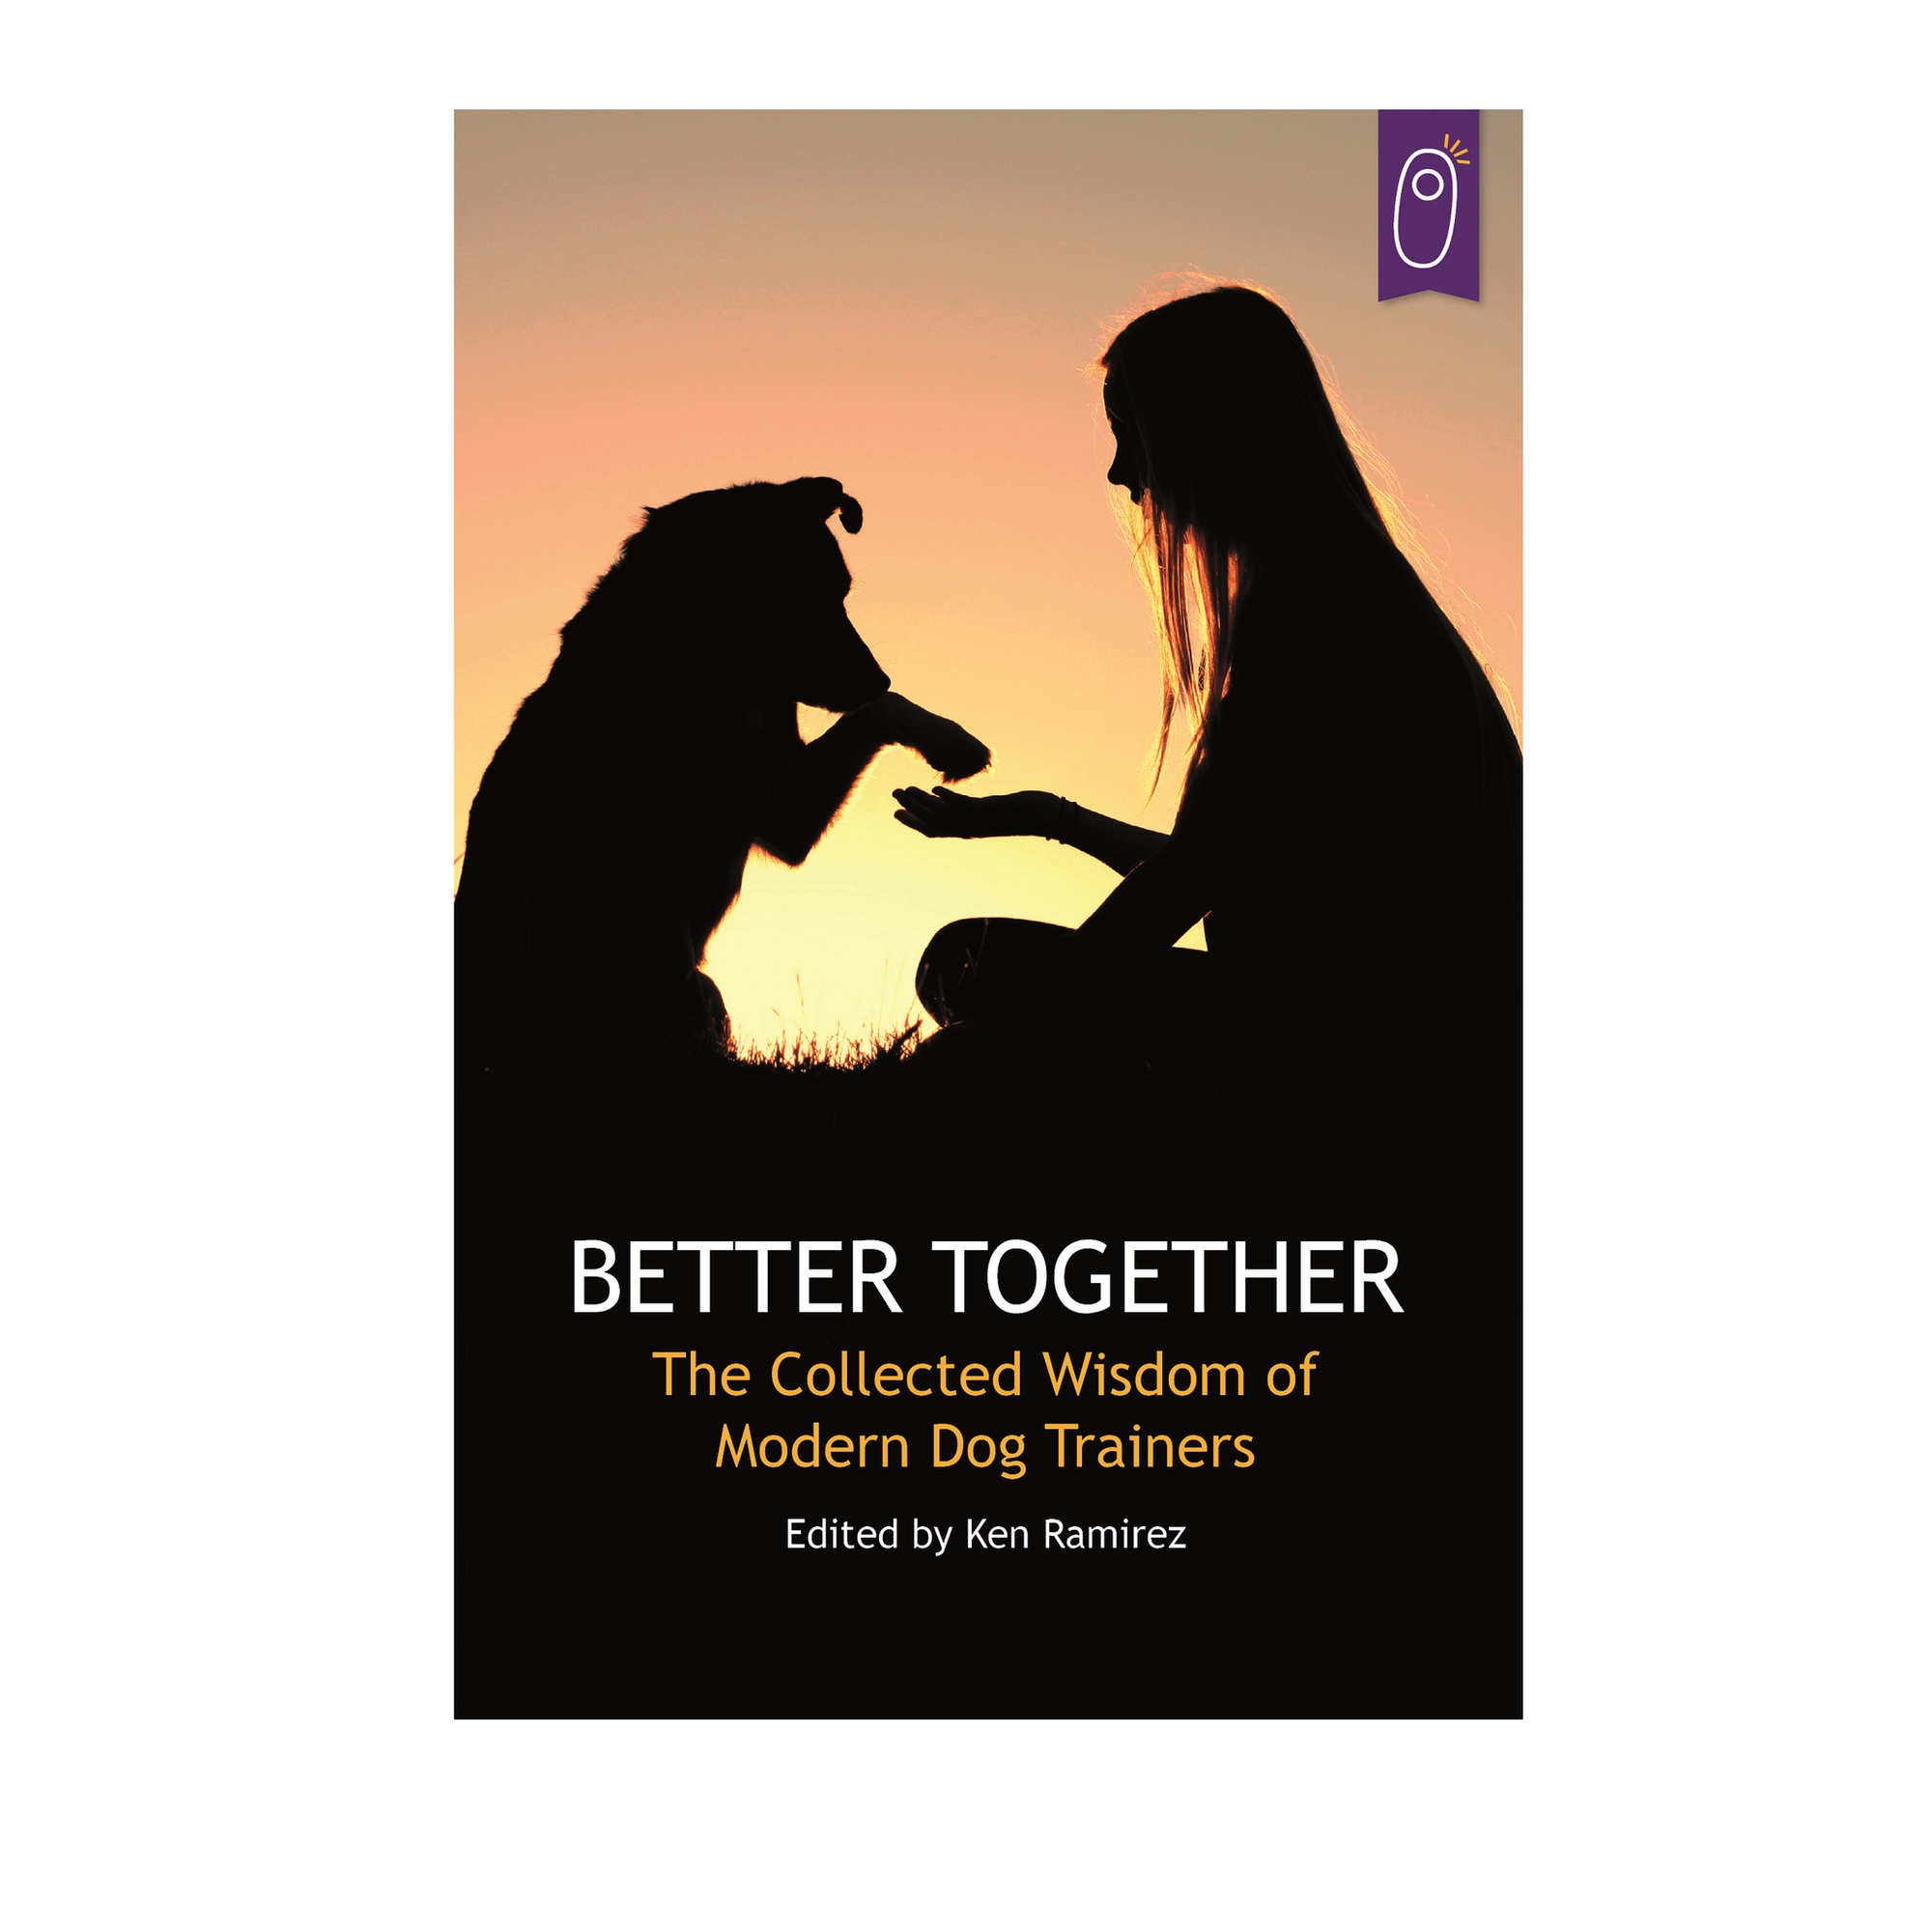 Better Together: The Collected Wisdom of Modern Dog Trainers Edited by Ken Ramirez